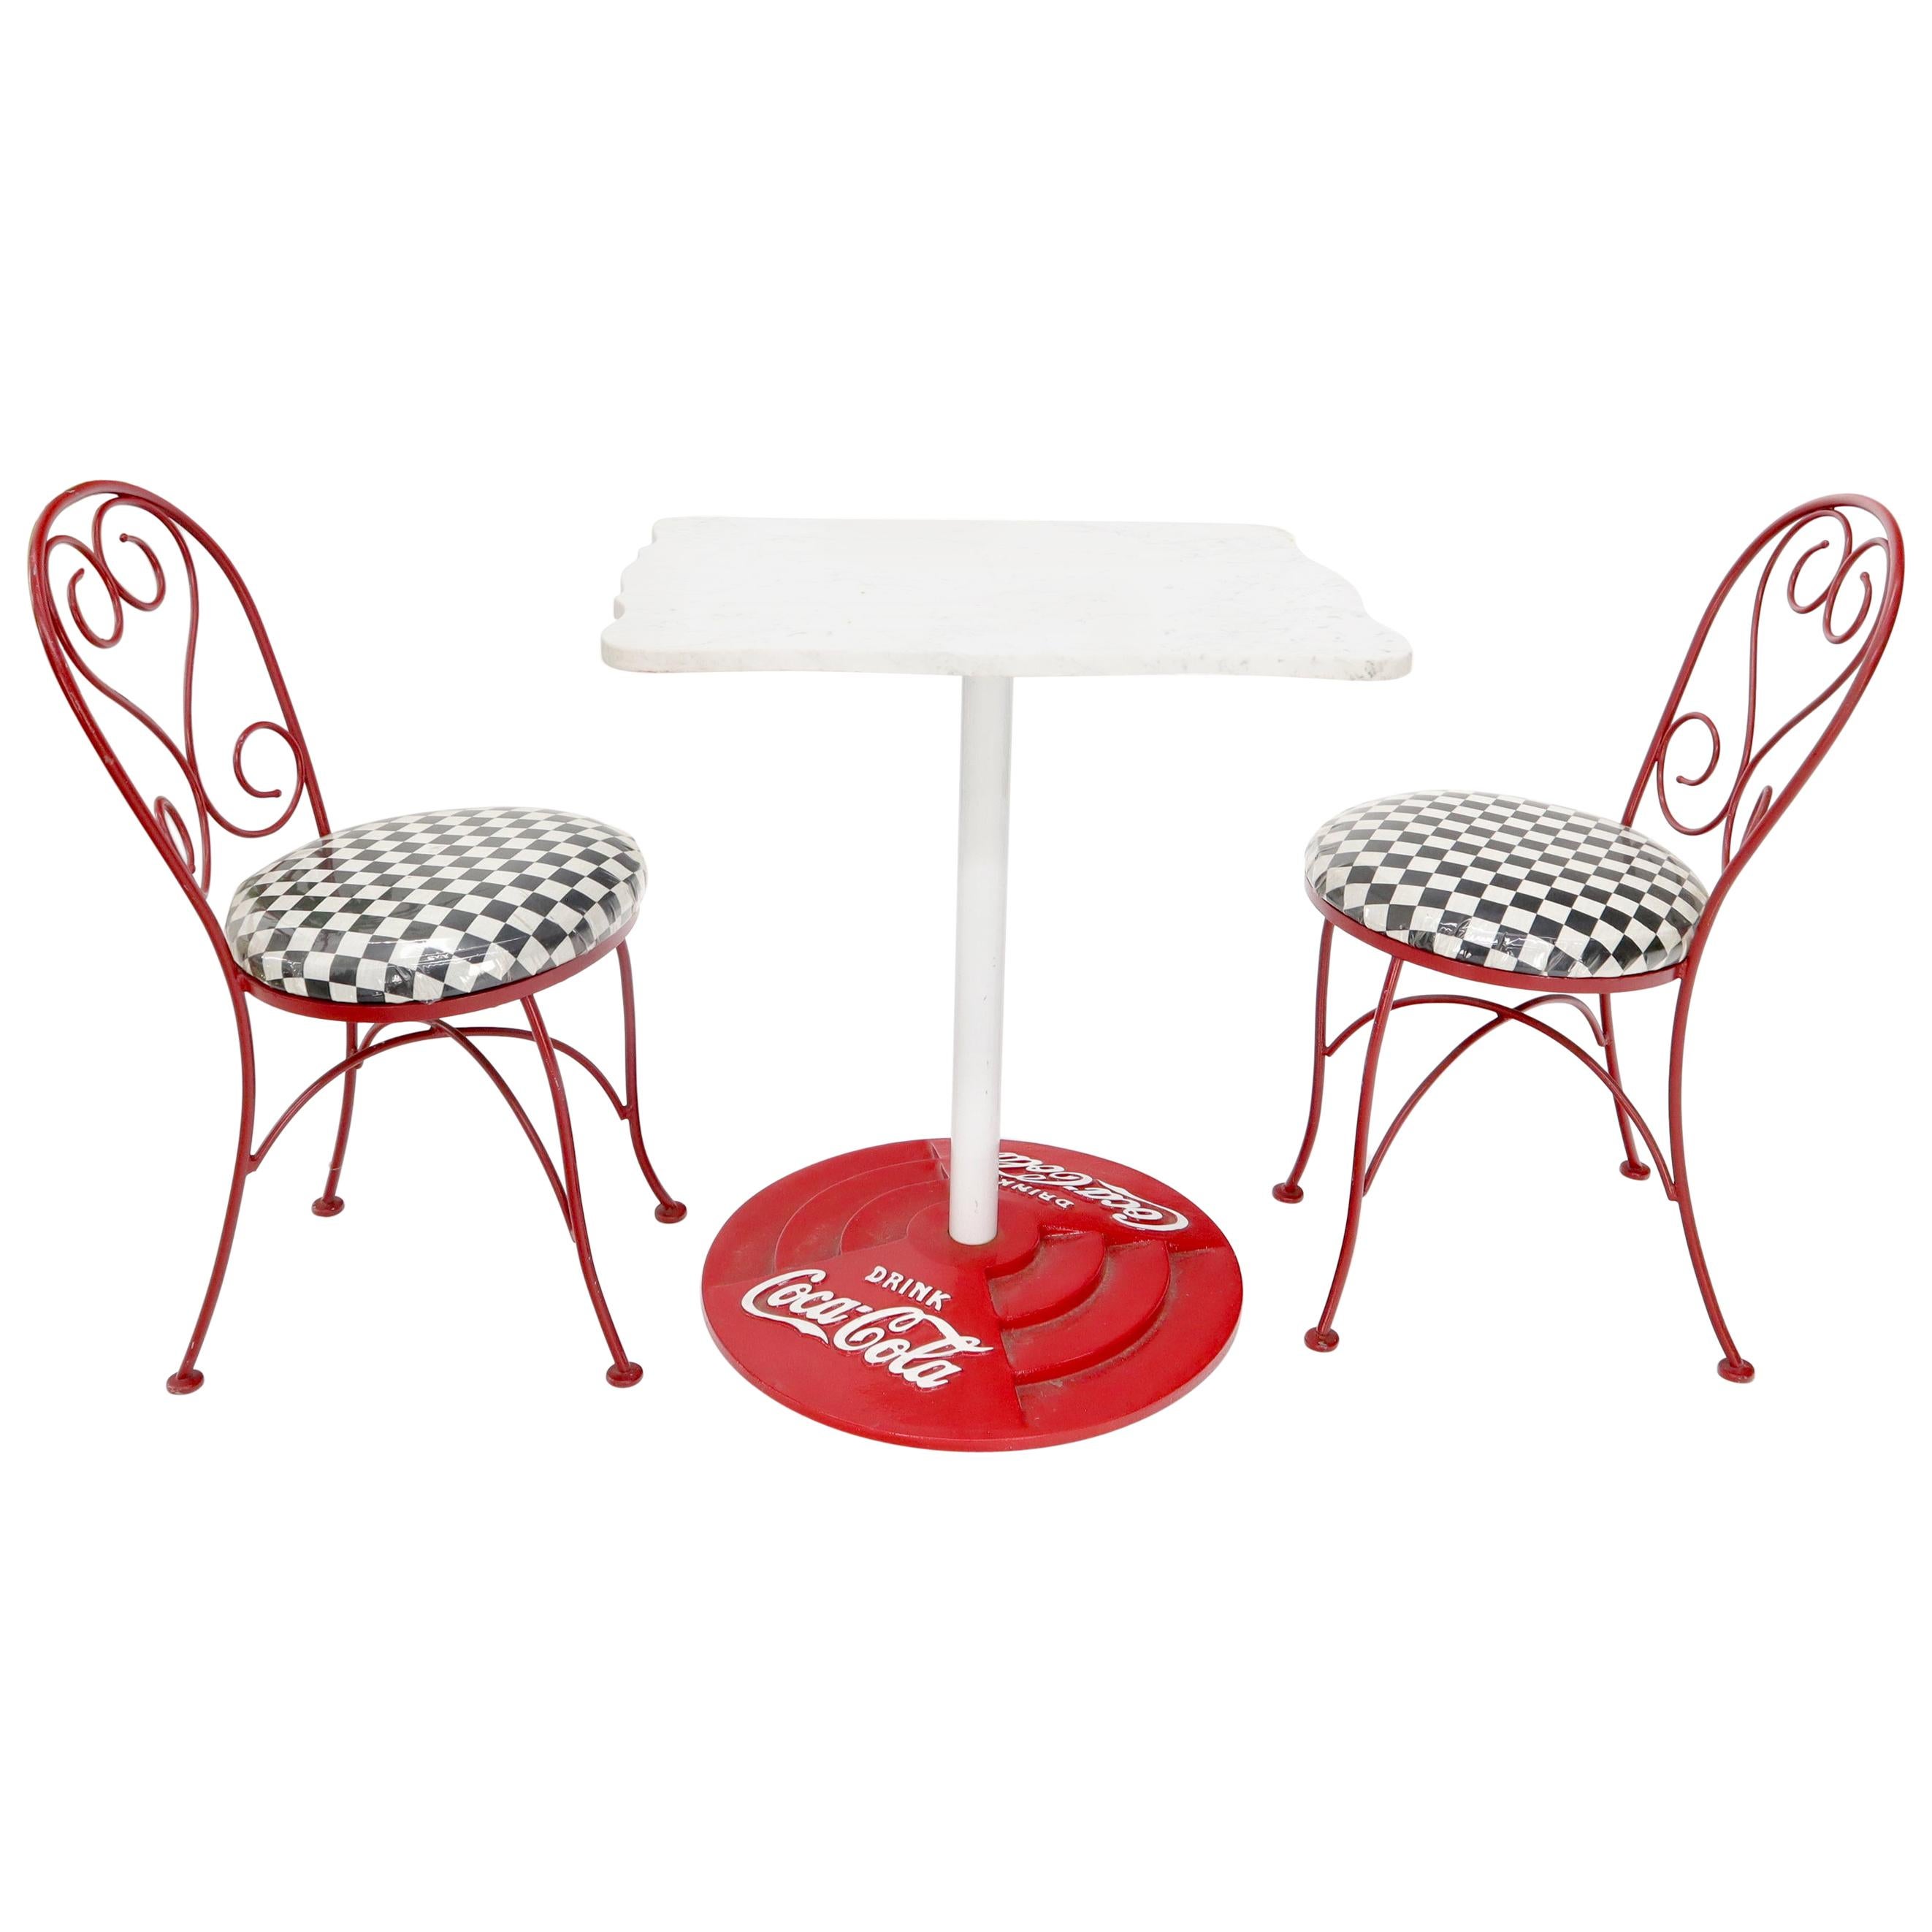 Two Chairs Cast Iron Marble-Top Table Coca-Cola Dinette Ice Cream Set Cafe Table For Sale